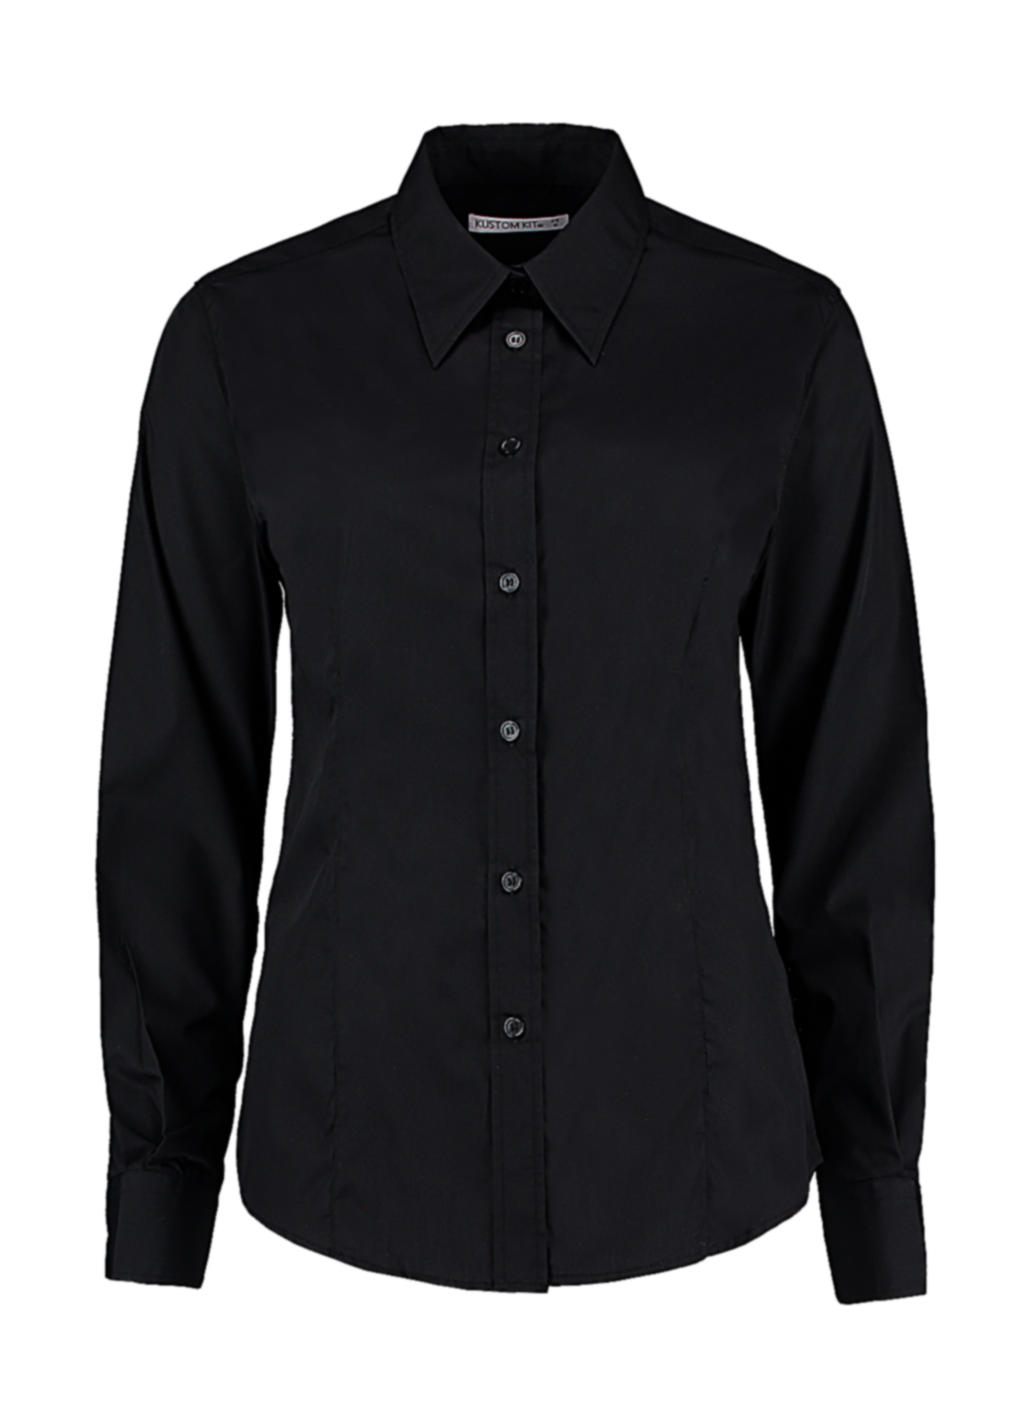  Womens Classic Fit Workforce Shirt in Farbe Black